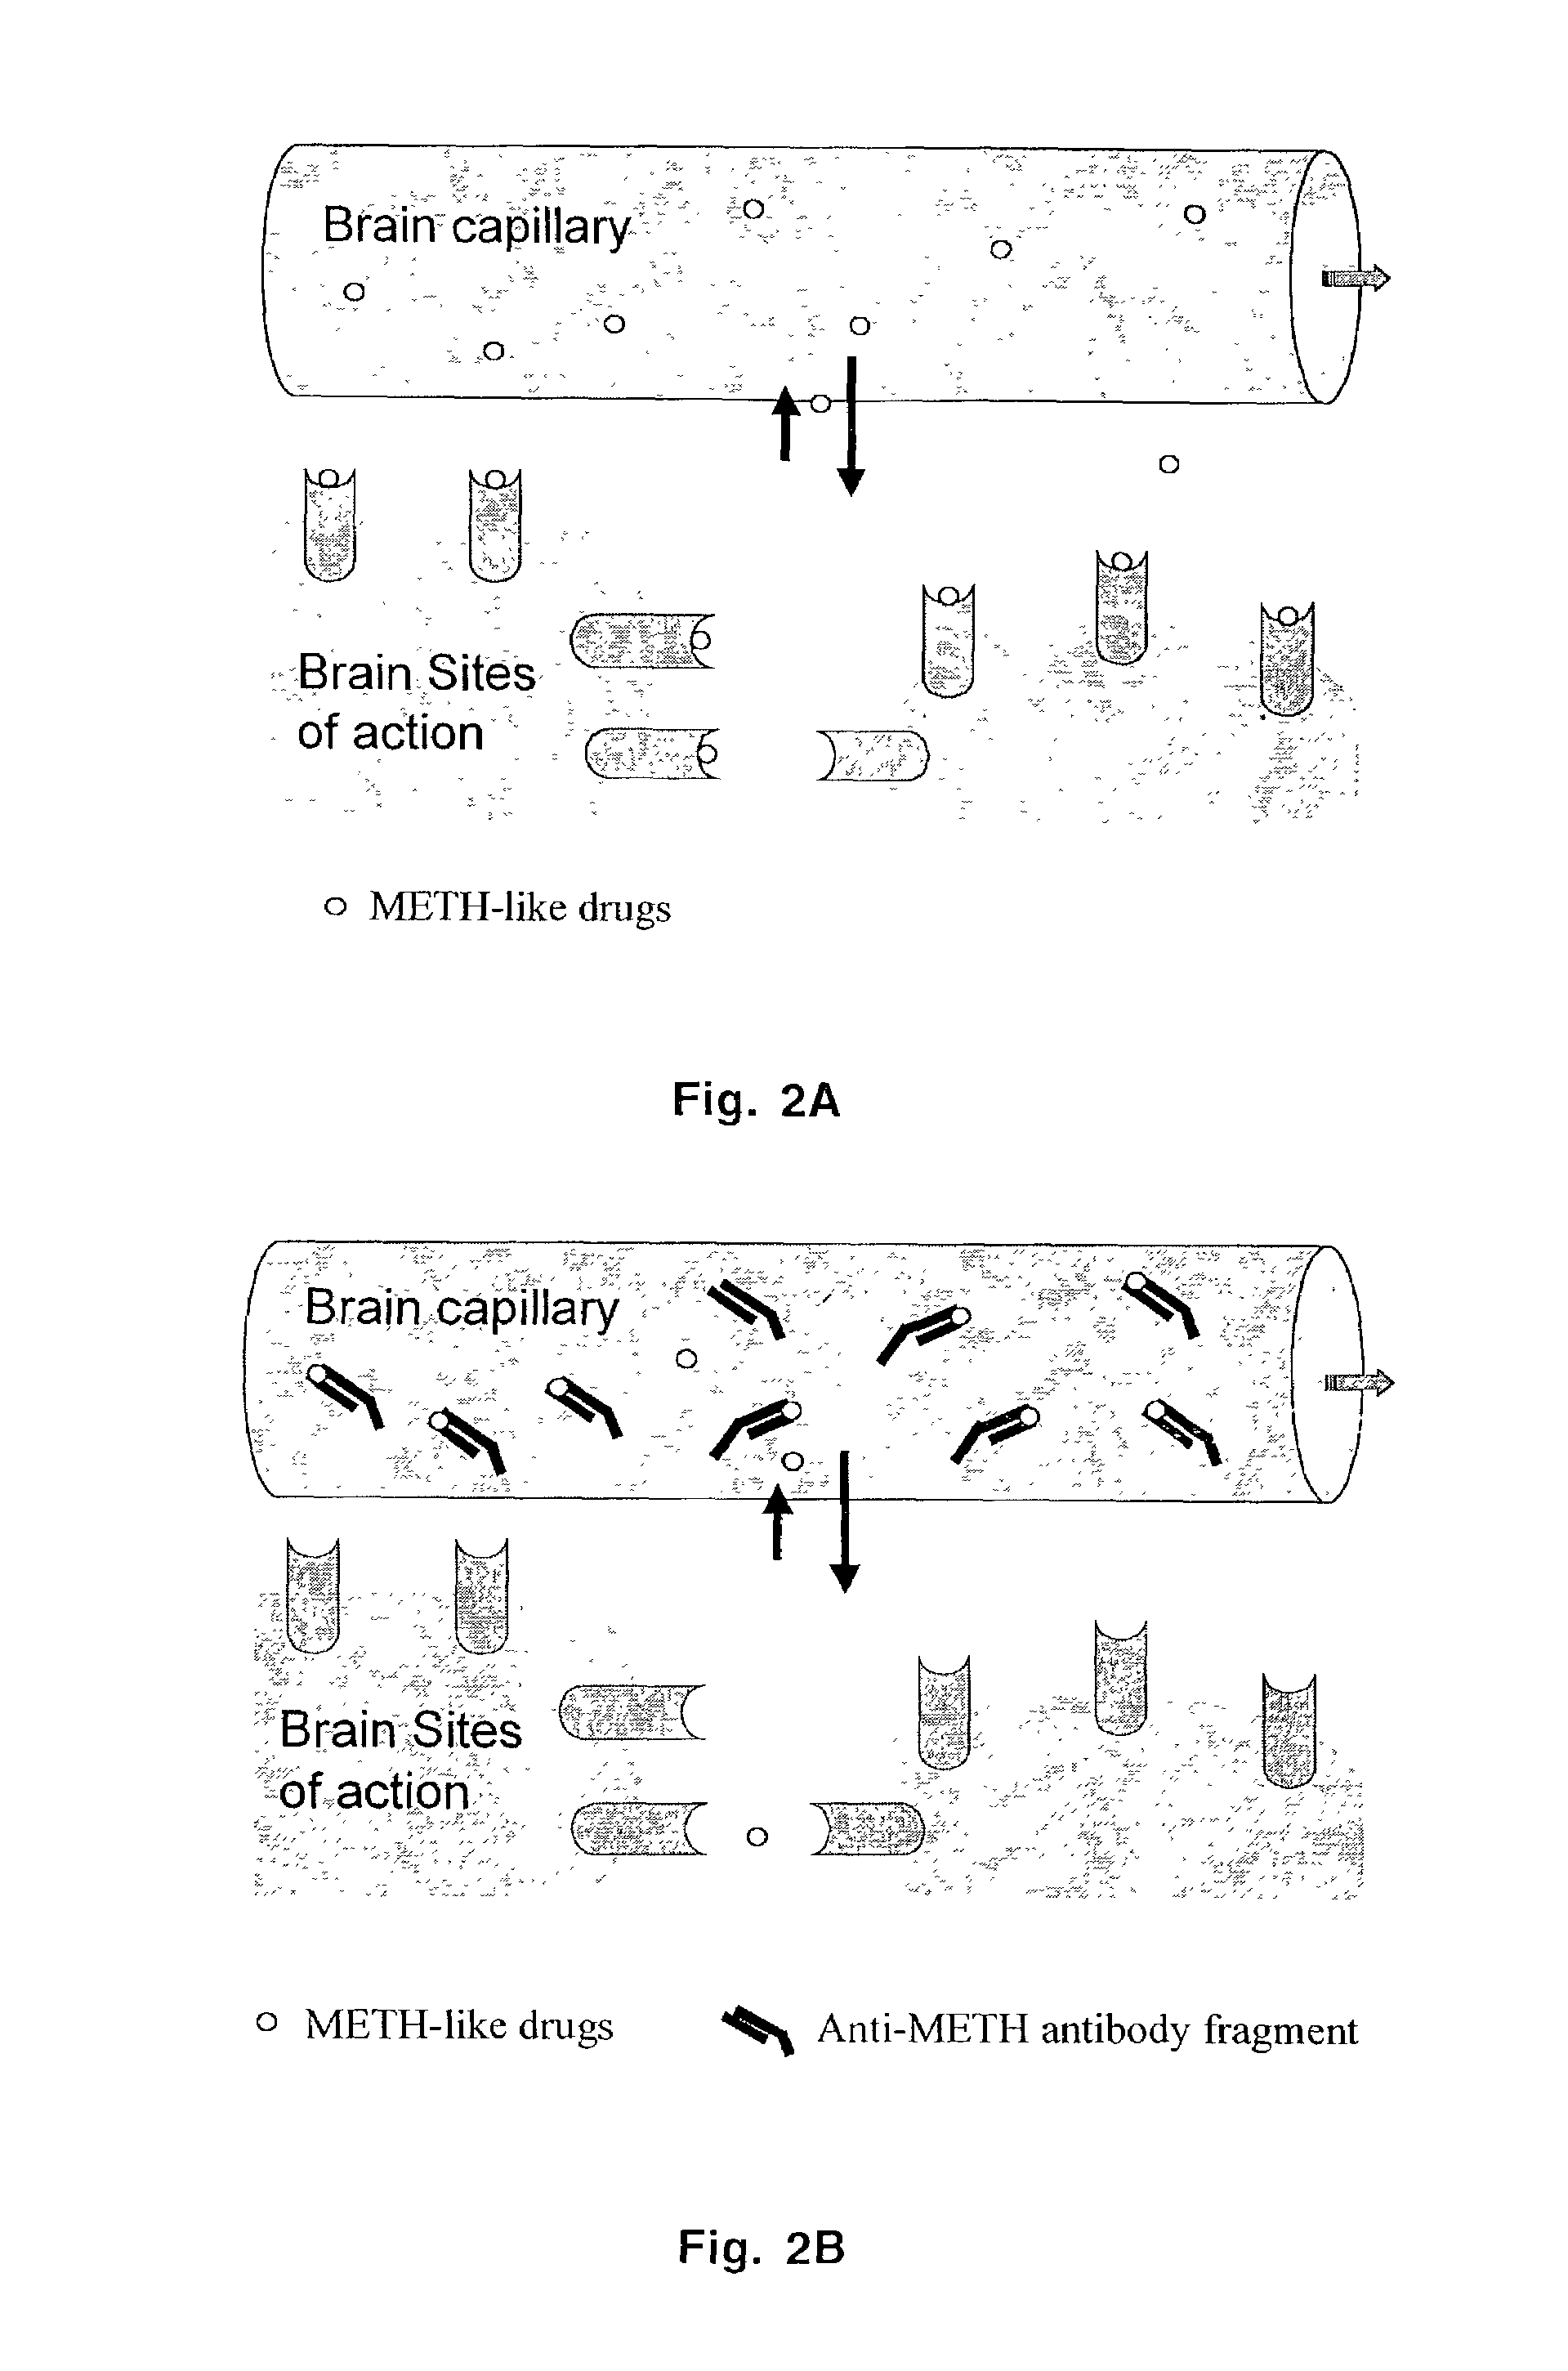 Monoclonal antibody antagonists for treating medical problems associated with d-amphetamine-like drugs